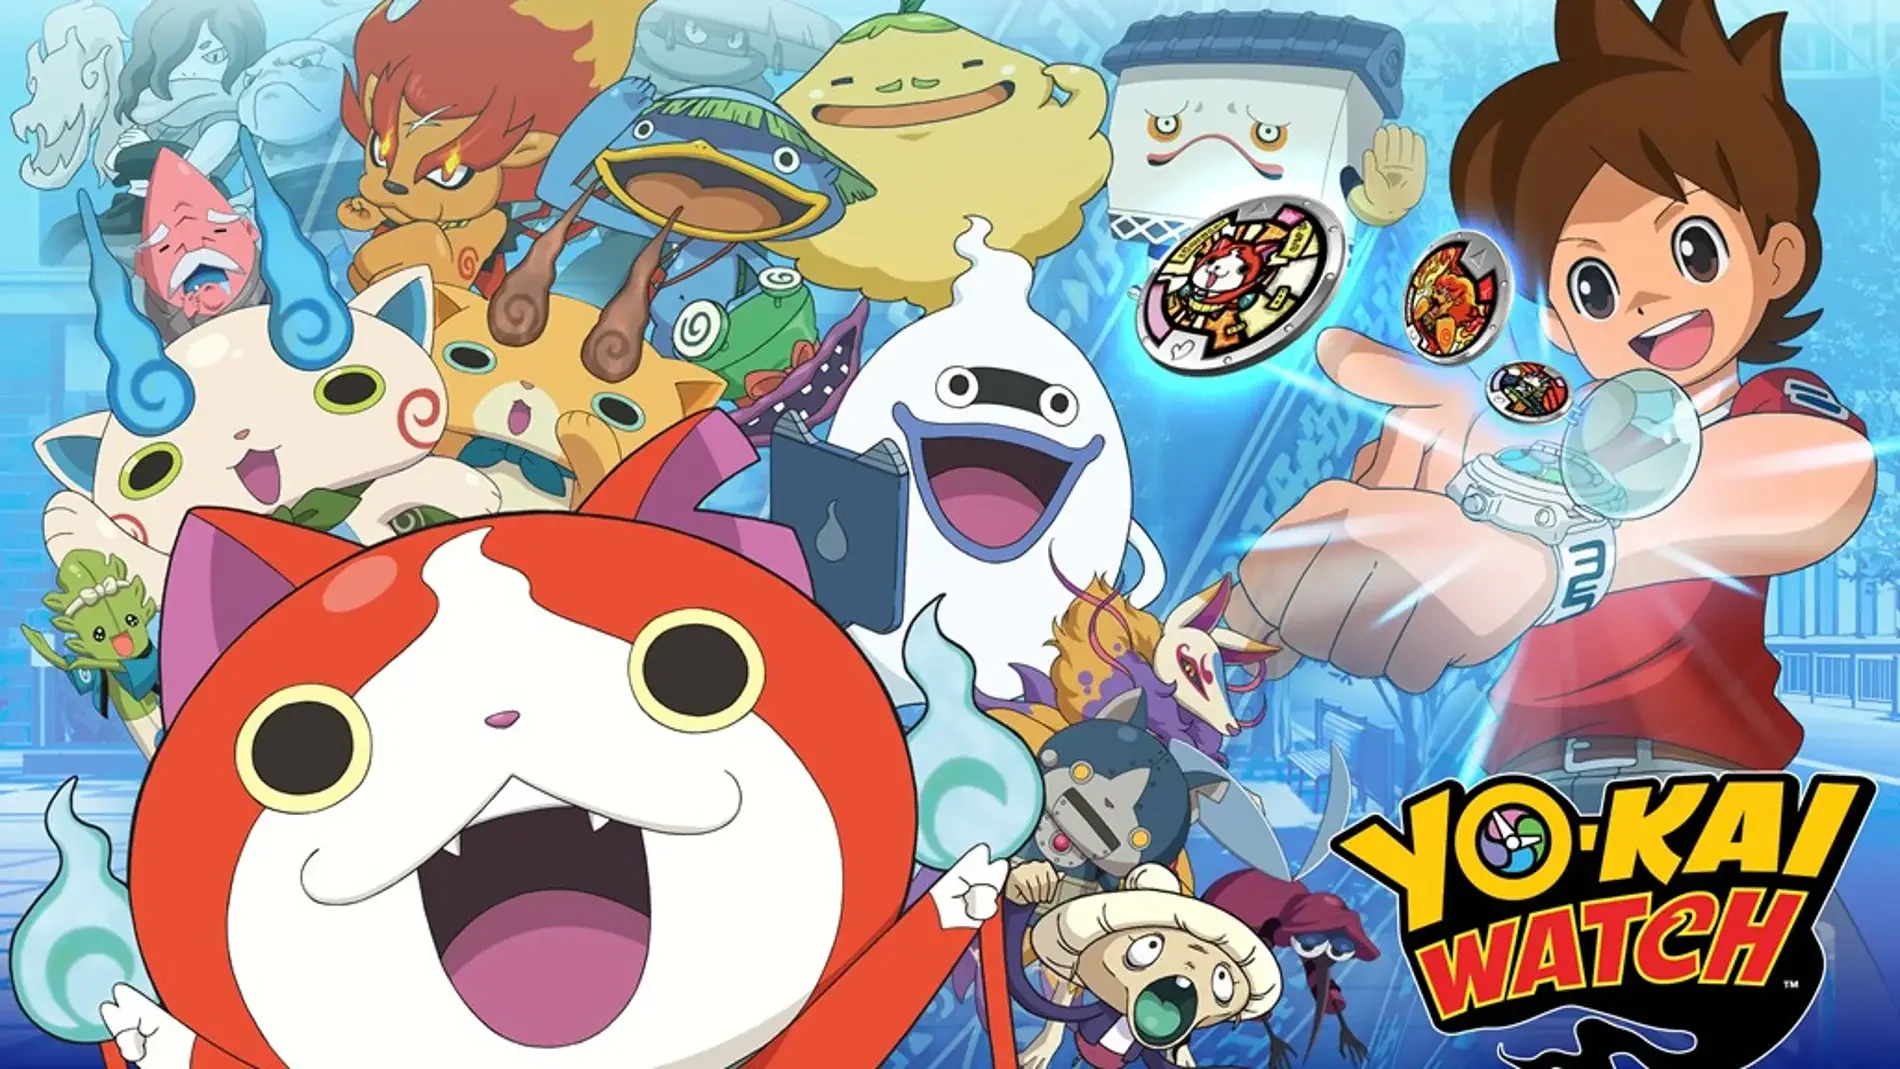 Yo kai Watch The Movie Hindi Dubbed Download FHD Rare Toons India